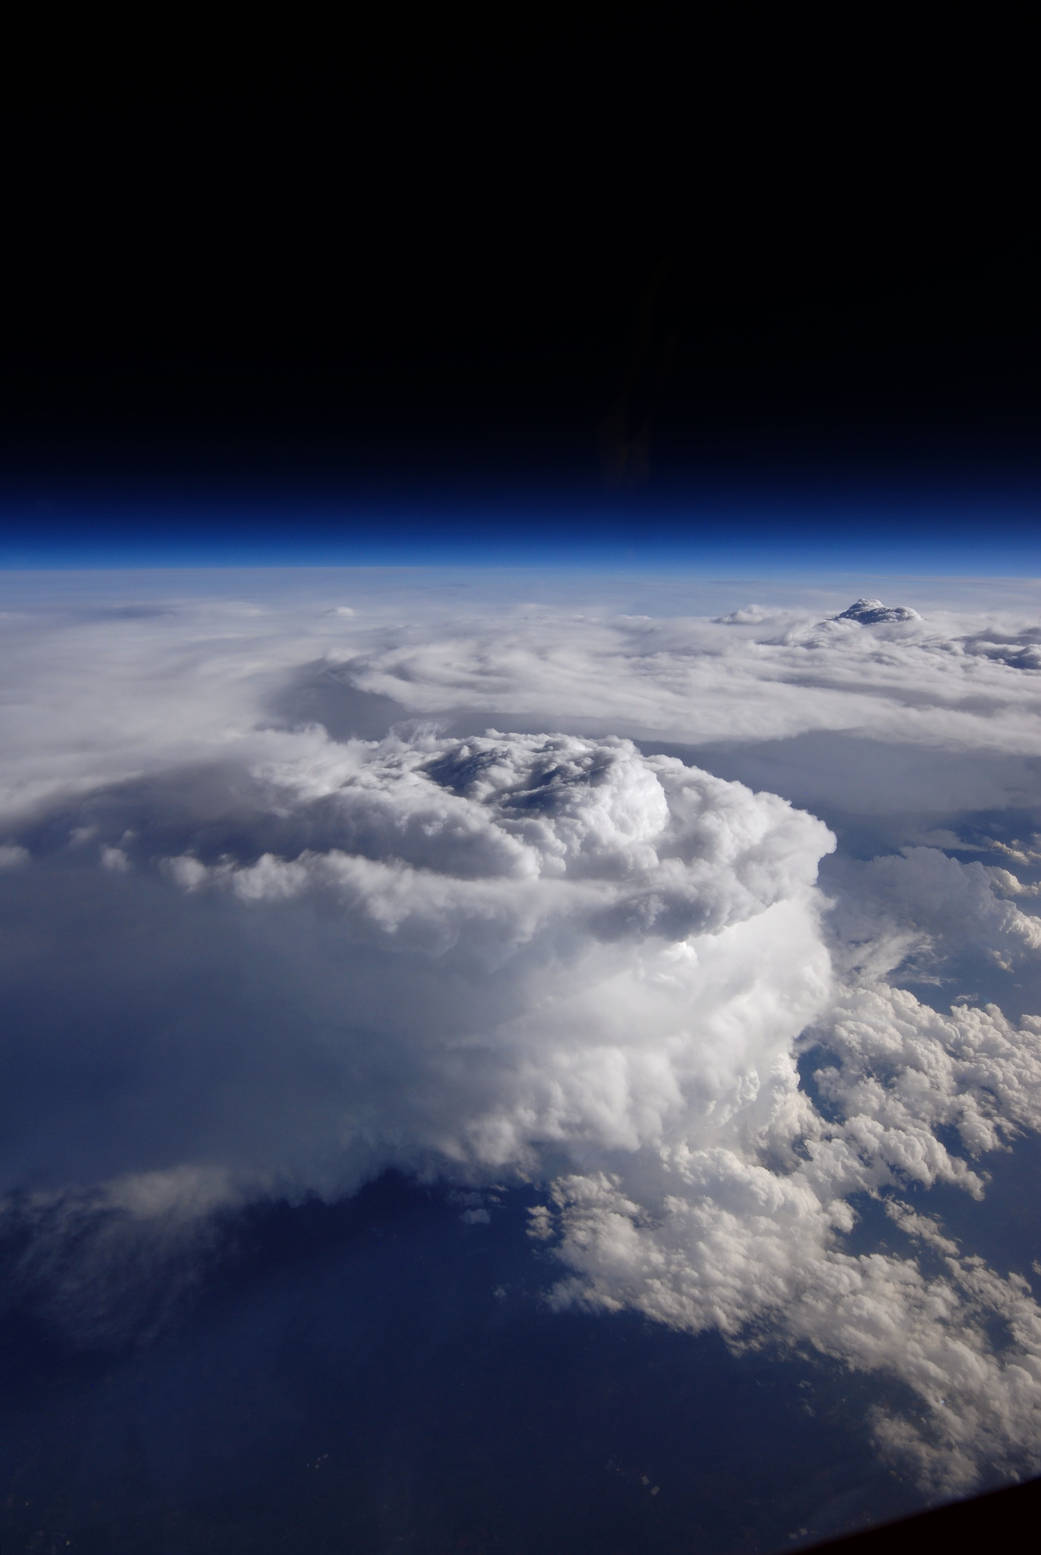 This storm cell photo was taken from NASA's high-altitude ER-2 aircraft on May 23, 2014, during a study aimed at gaining a bette